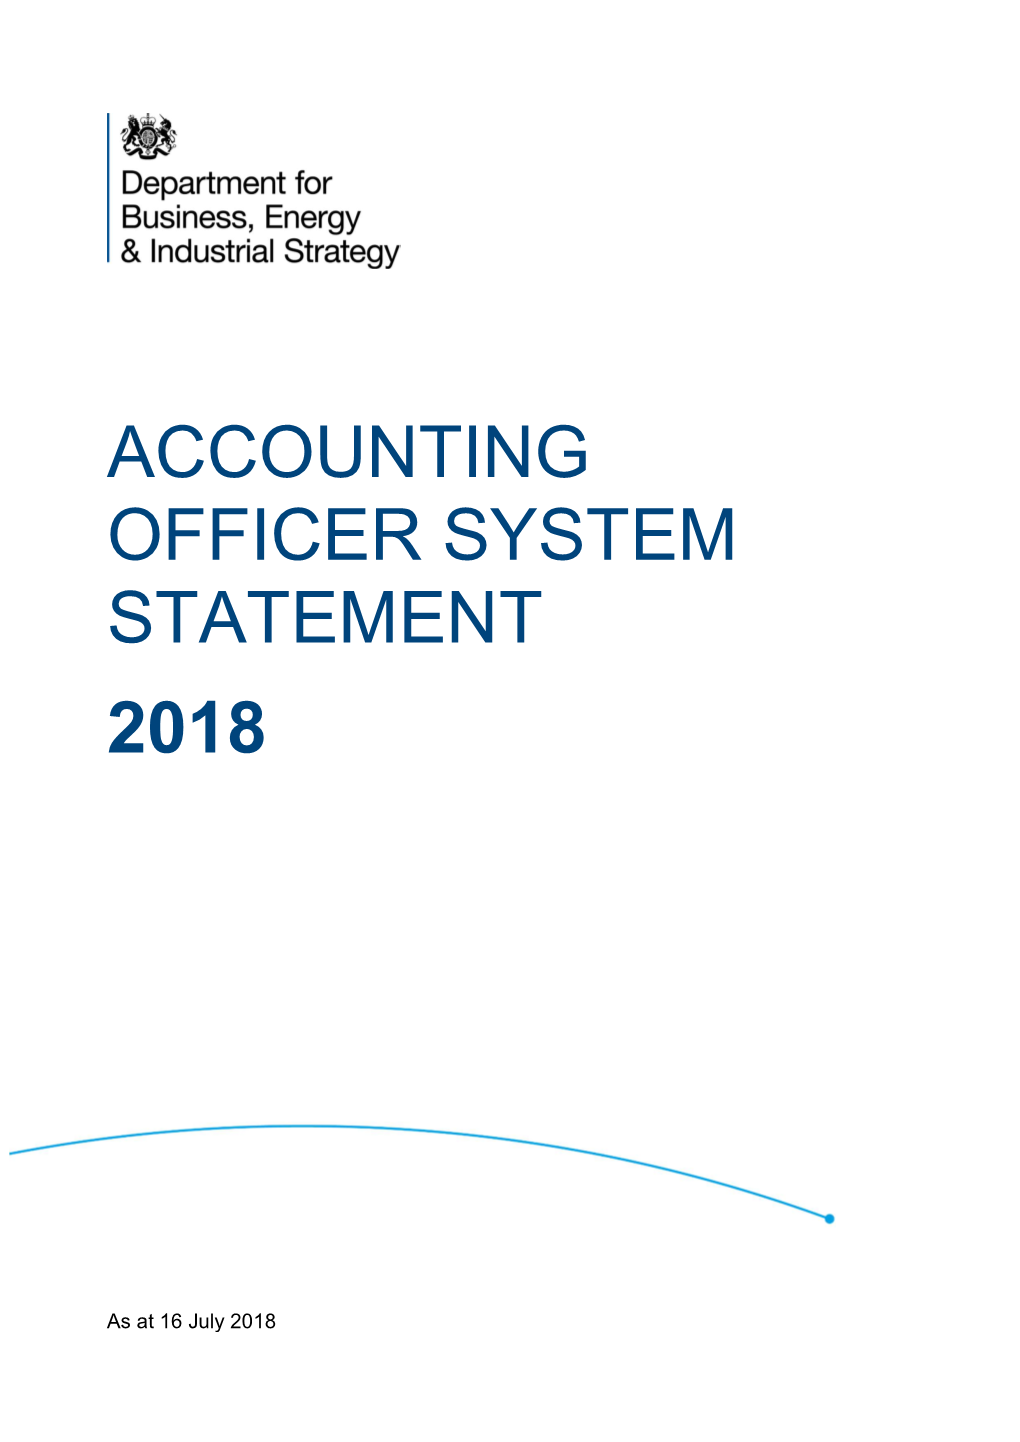 BEIS Accounting Officer System Statement 2018